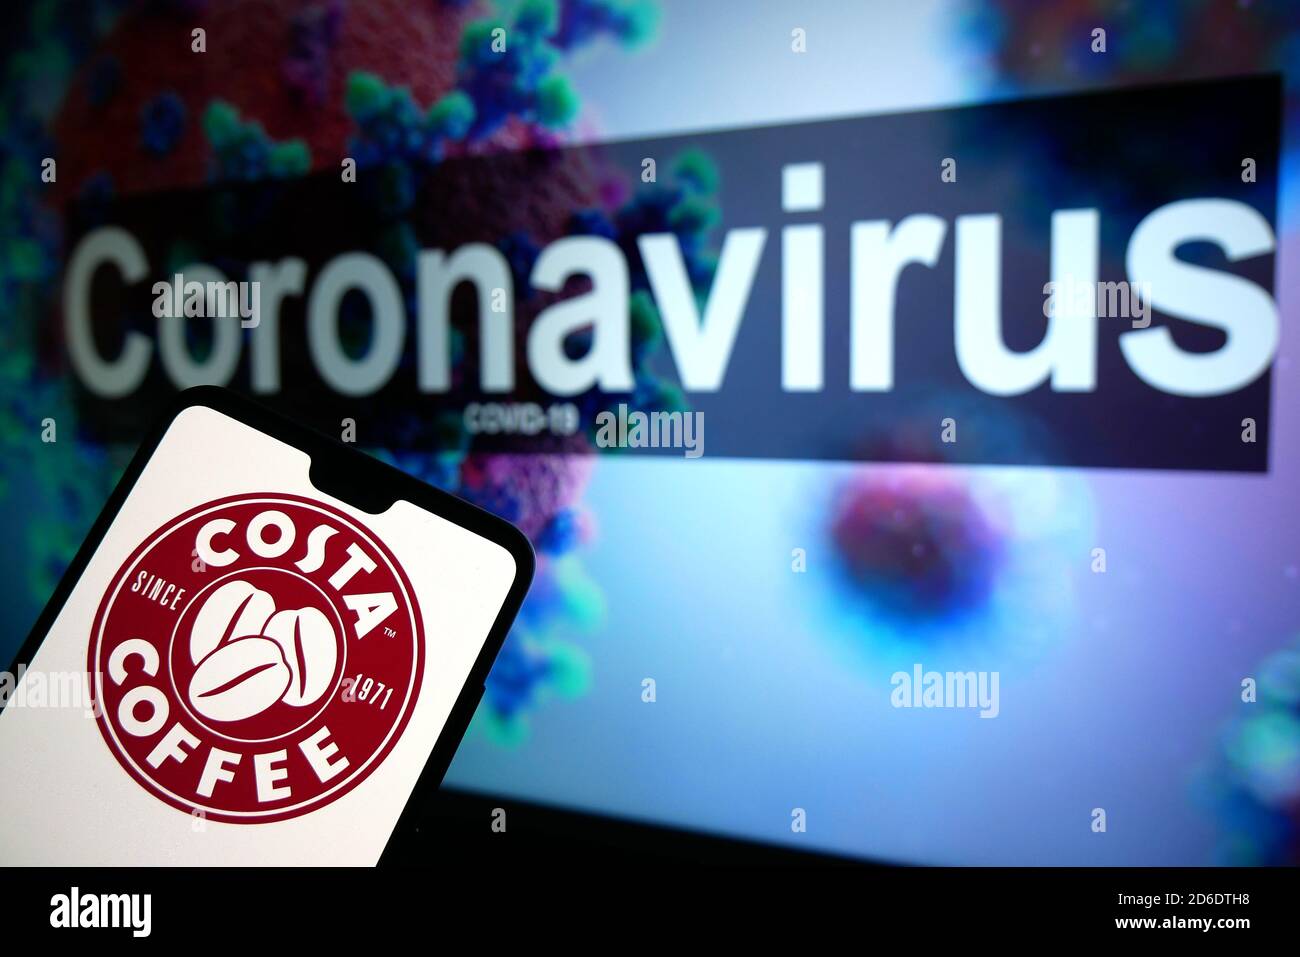 The Costa Coffee logo seen displayed on a mobile phone with an illustrative model of the Coronavirus displayed on a monitor in the background. Stock Photo